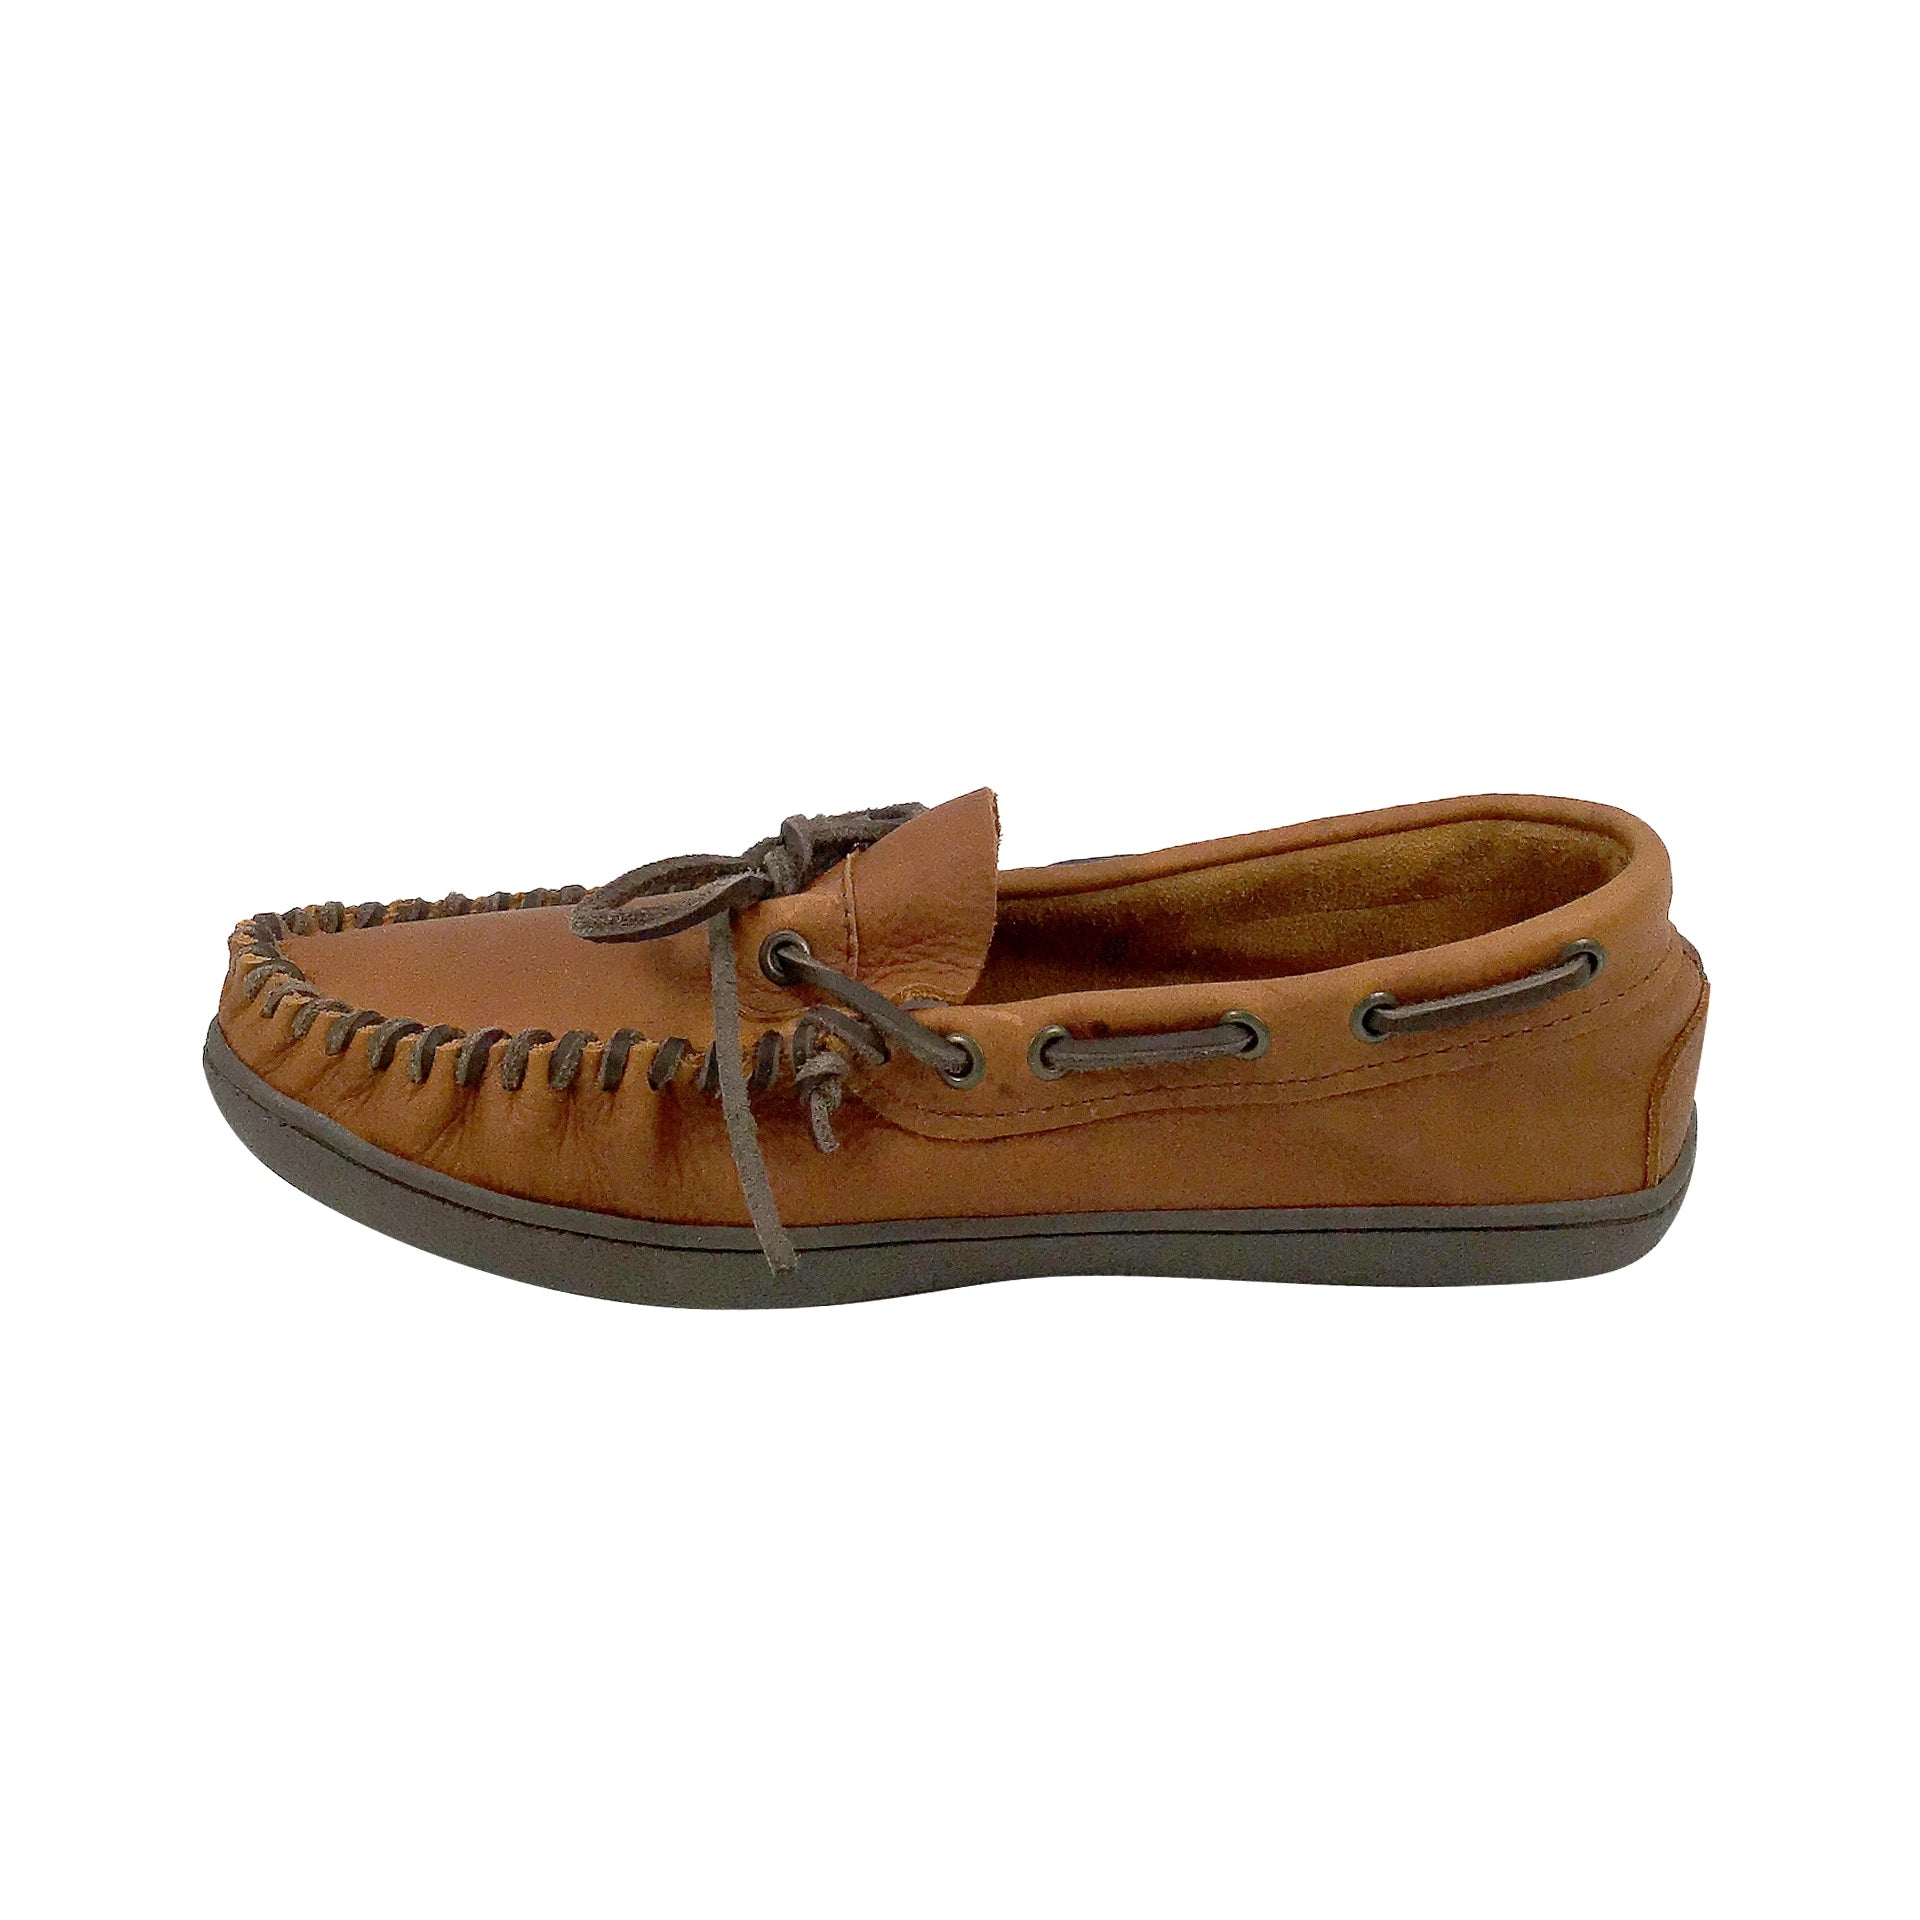 Men's Earthing Moccasin Shoe Wide with Copper Rivet and Rubber Sole